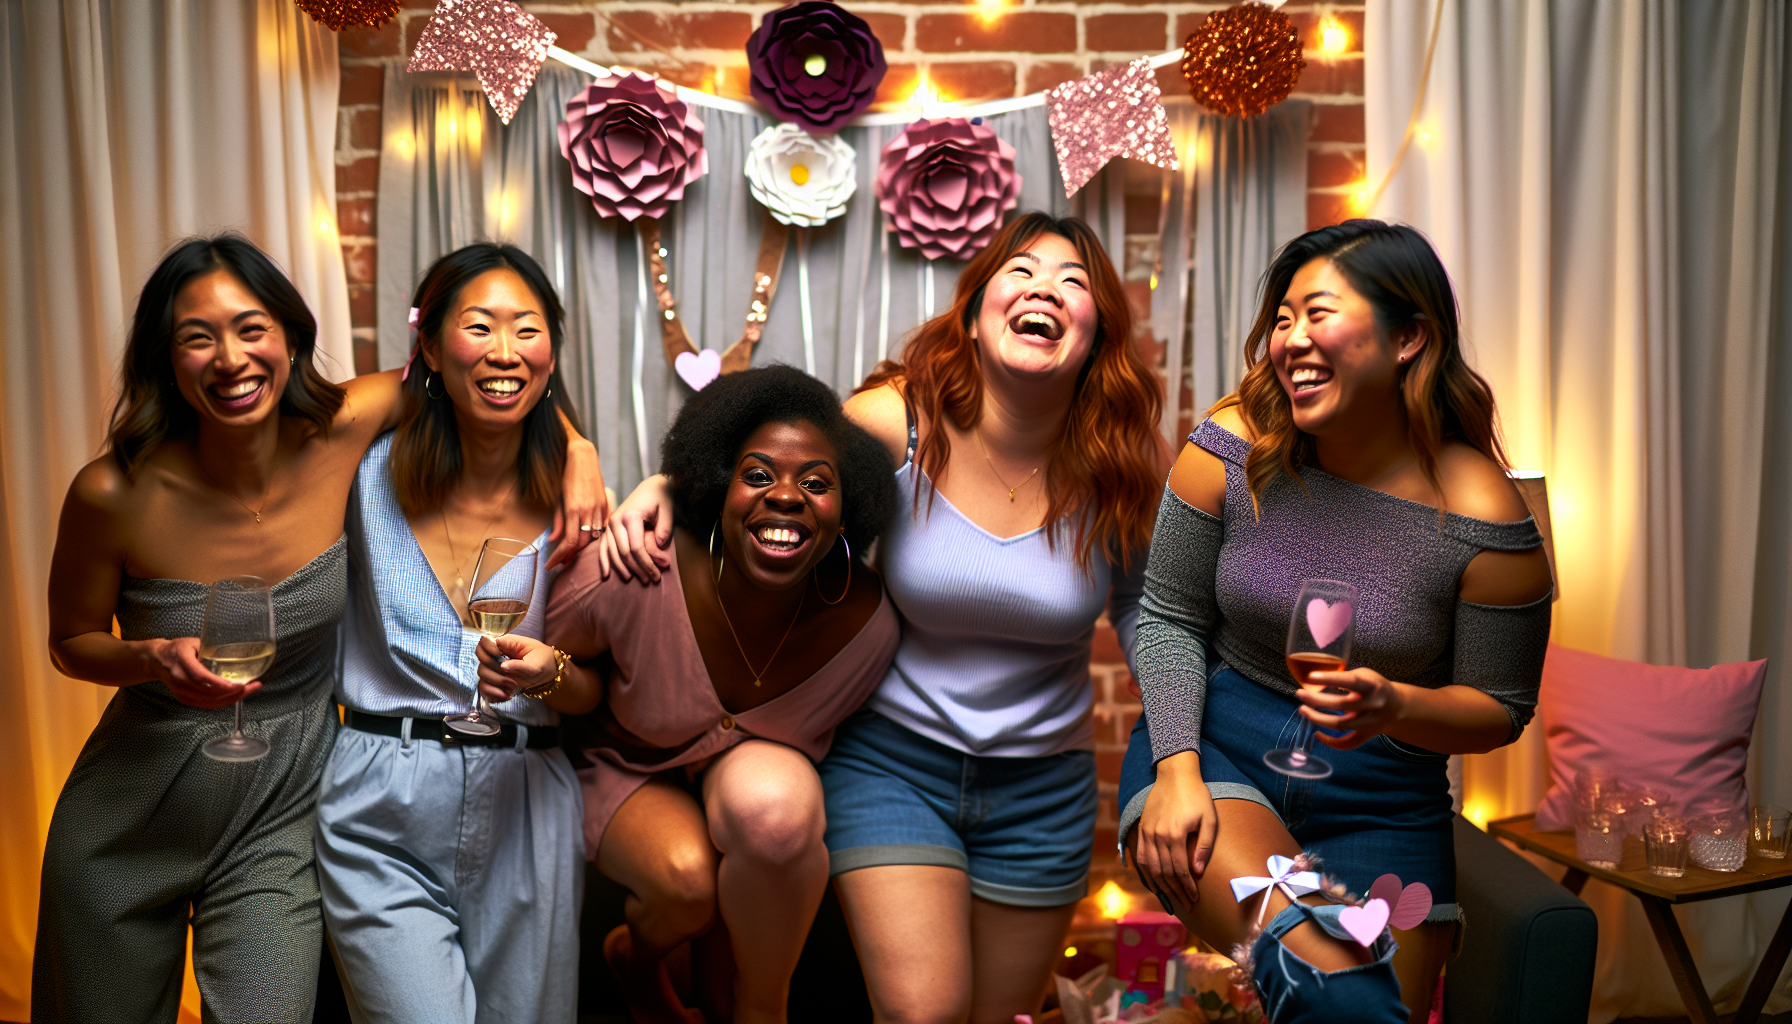 Group of friends posing with DIY decorations at a bachelorette party